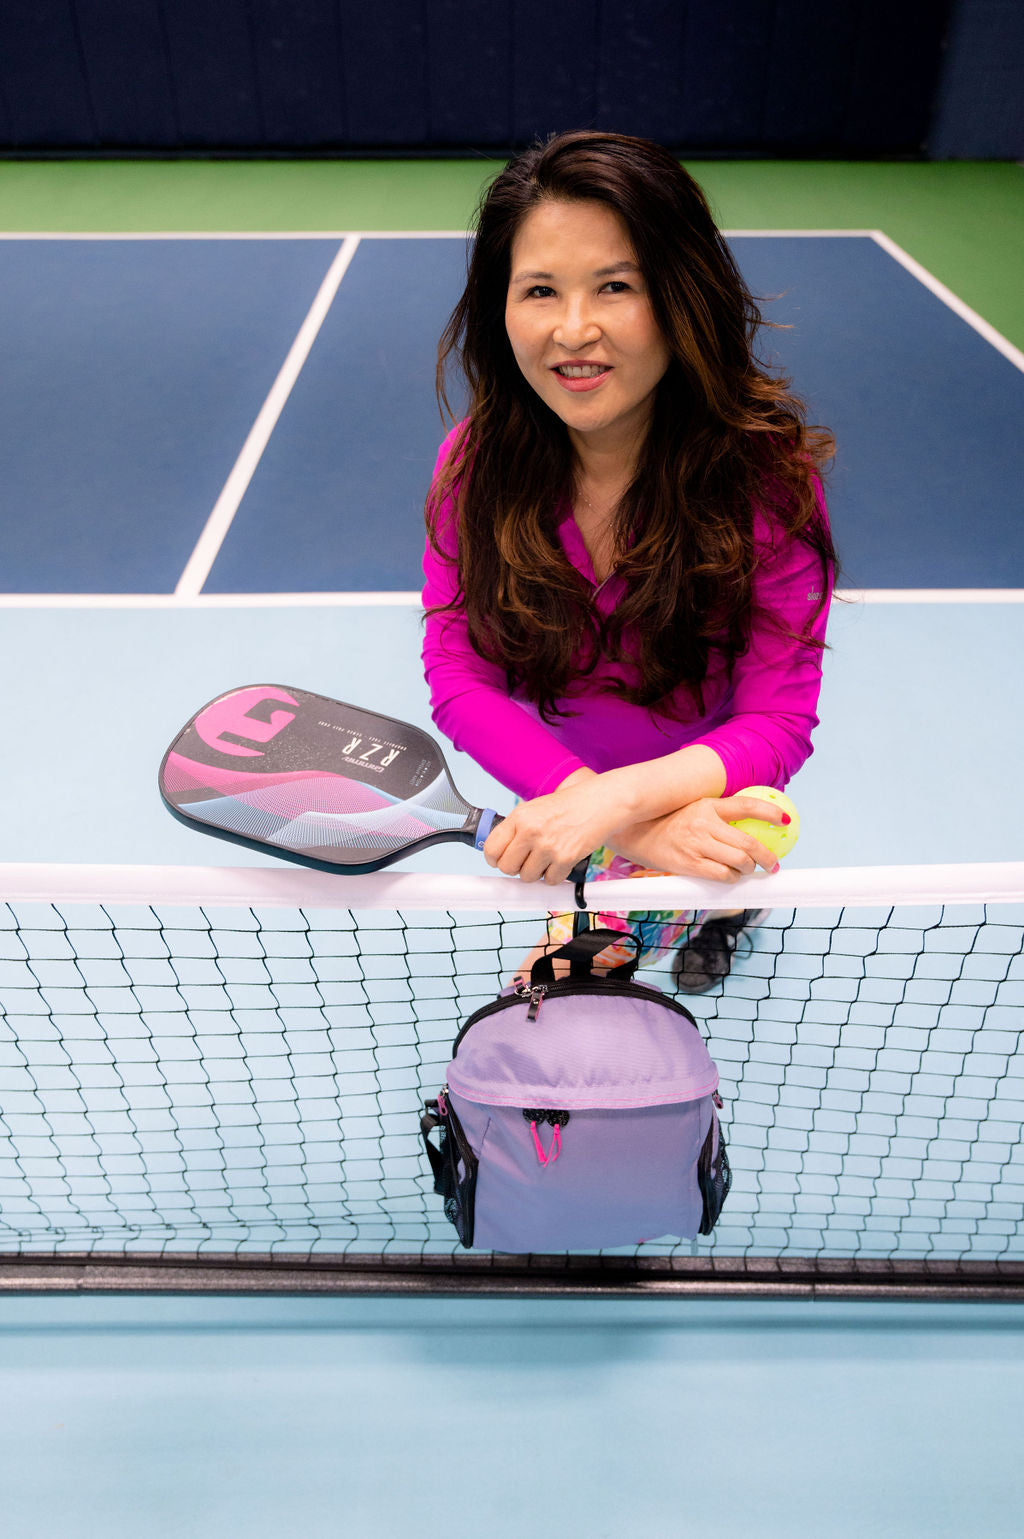 Woman on court wearing 1/4 zip pink top and holding women's designer pickleball tote